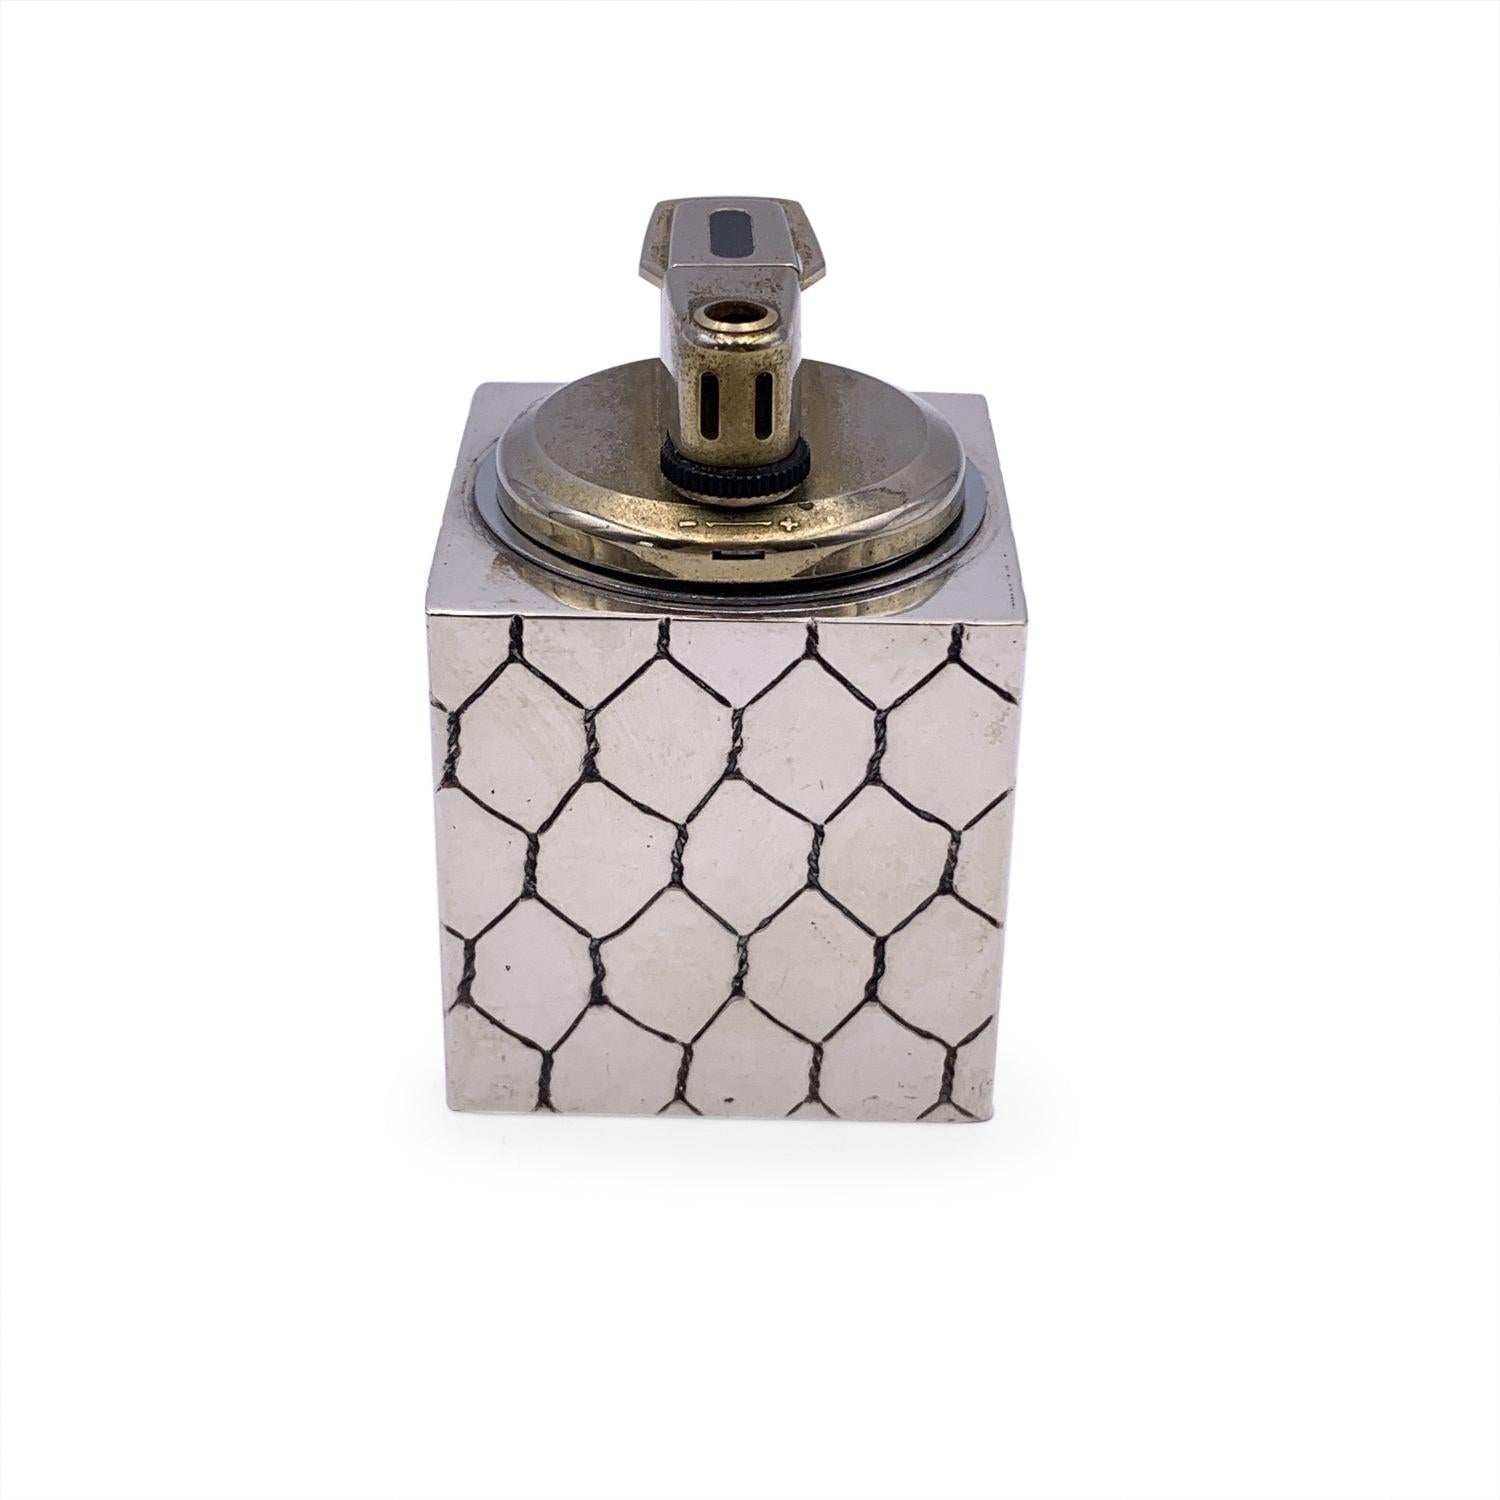 Vintage GUCCI table lighter. Cube-shaped. Silver metal with engraved motif. GG logo on the front. Marked 'Gucci - Italy' on the base. Height: 3 inches - 7.6 cm. Width: 2 inches - 5.1 cm. Details MATERIAL: Metal COLOR: Silver MODEL: n.a. GENDER: